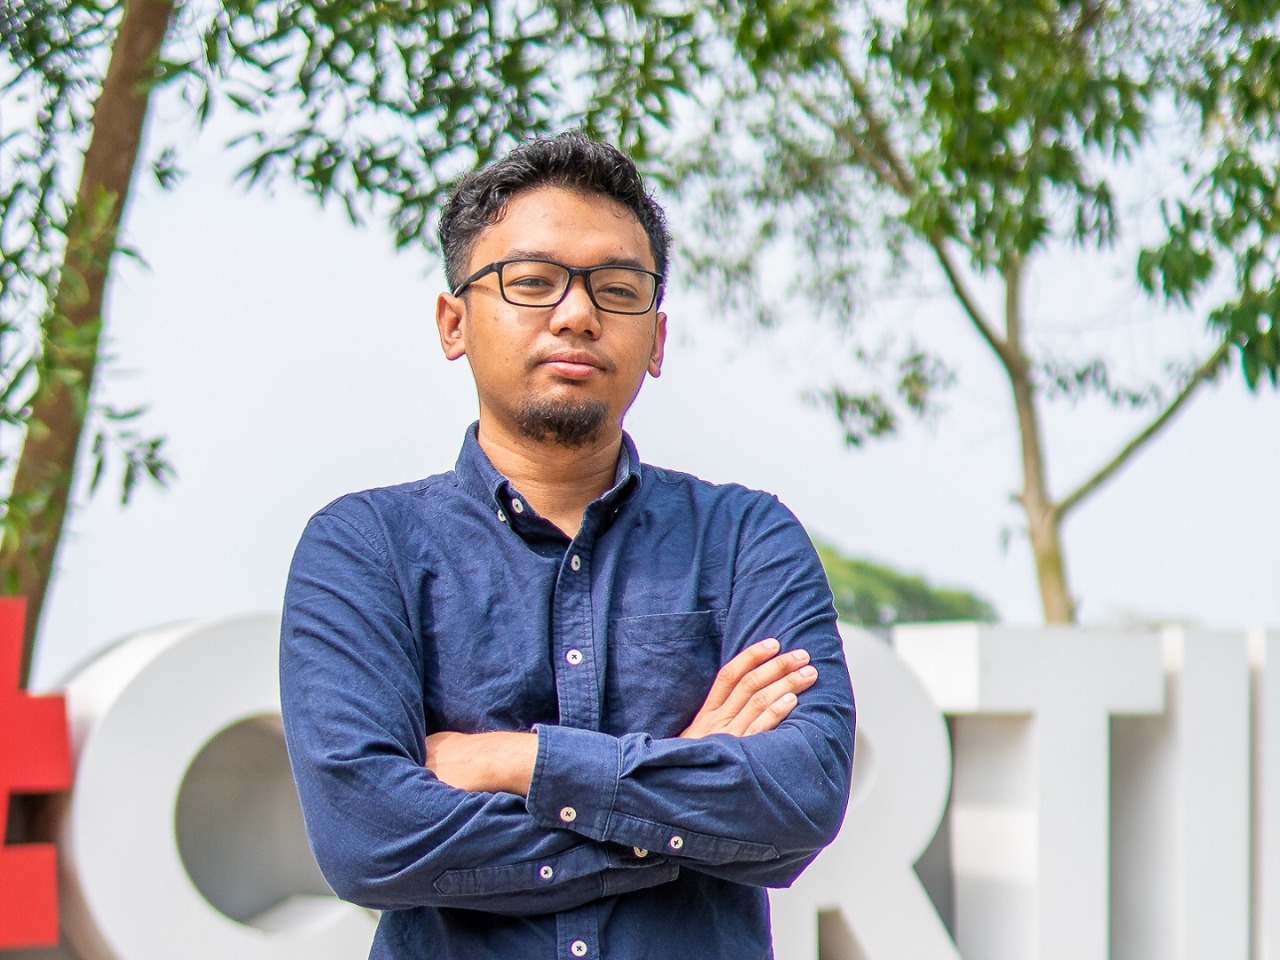 “I’m not going to lie. I’ve faced many challenges as a student here at Curtin Malaysia. The fact that the campus is located in the outskirts of Miri was a bit difficult to cope with at first as a lot of things seemed so inaccessible. I would complain...